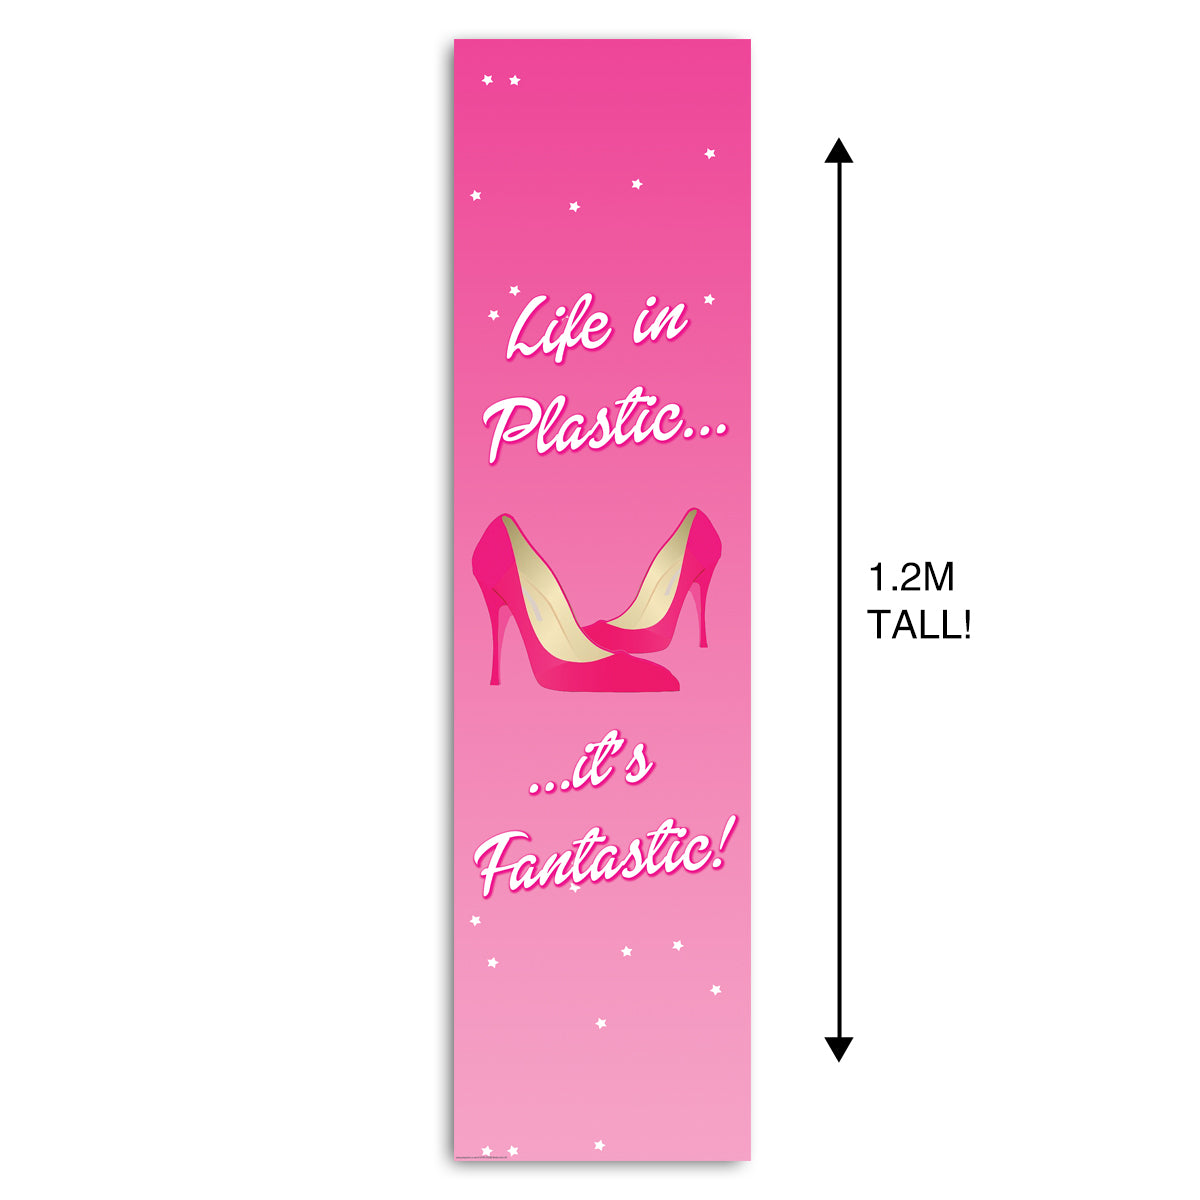 Hey Doll Portrait Wall Banner Party Decoration - 1.2m